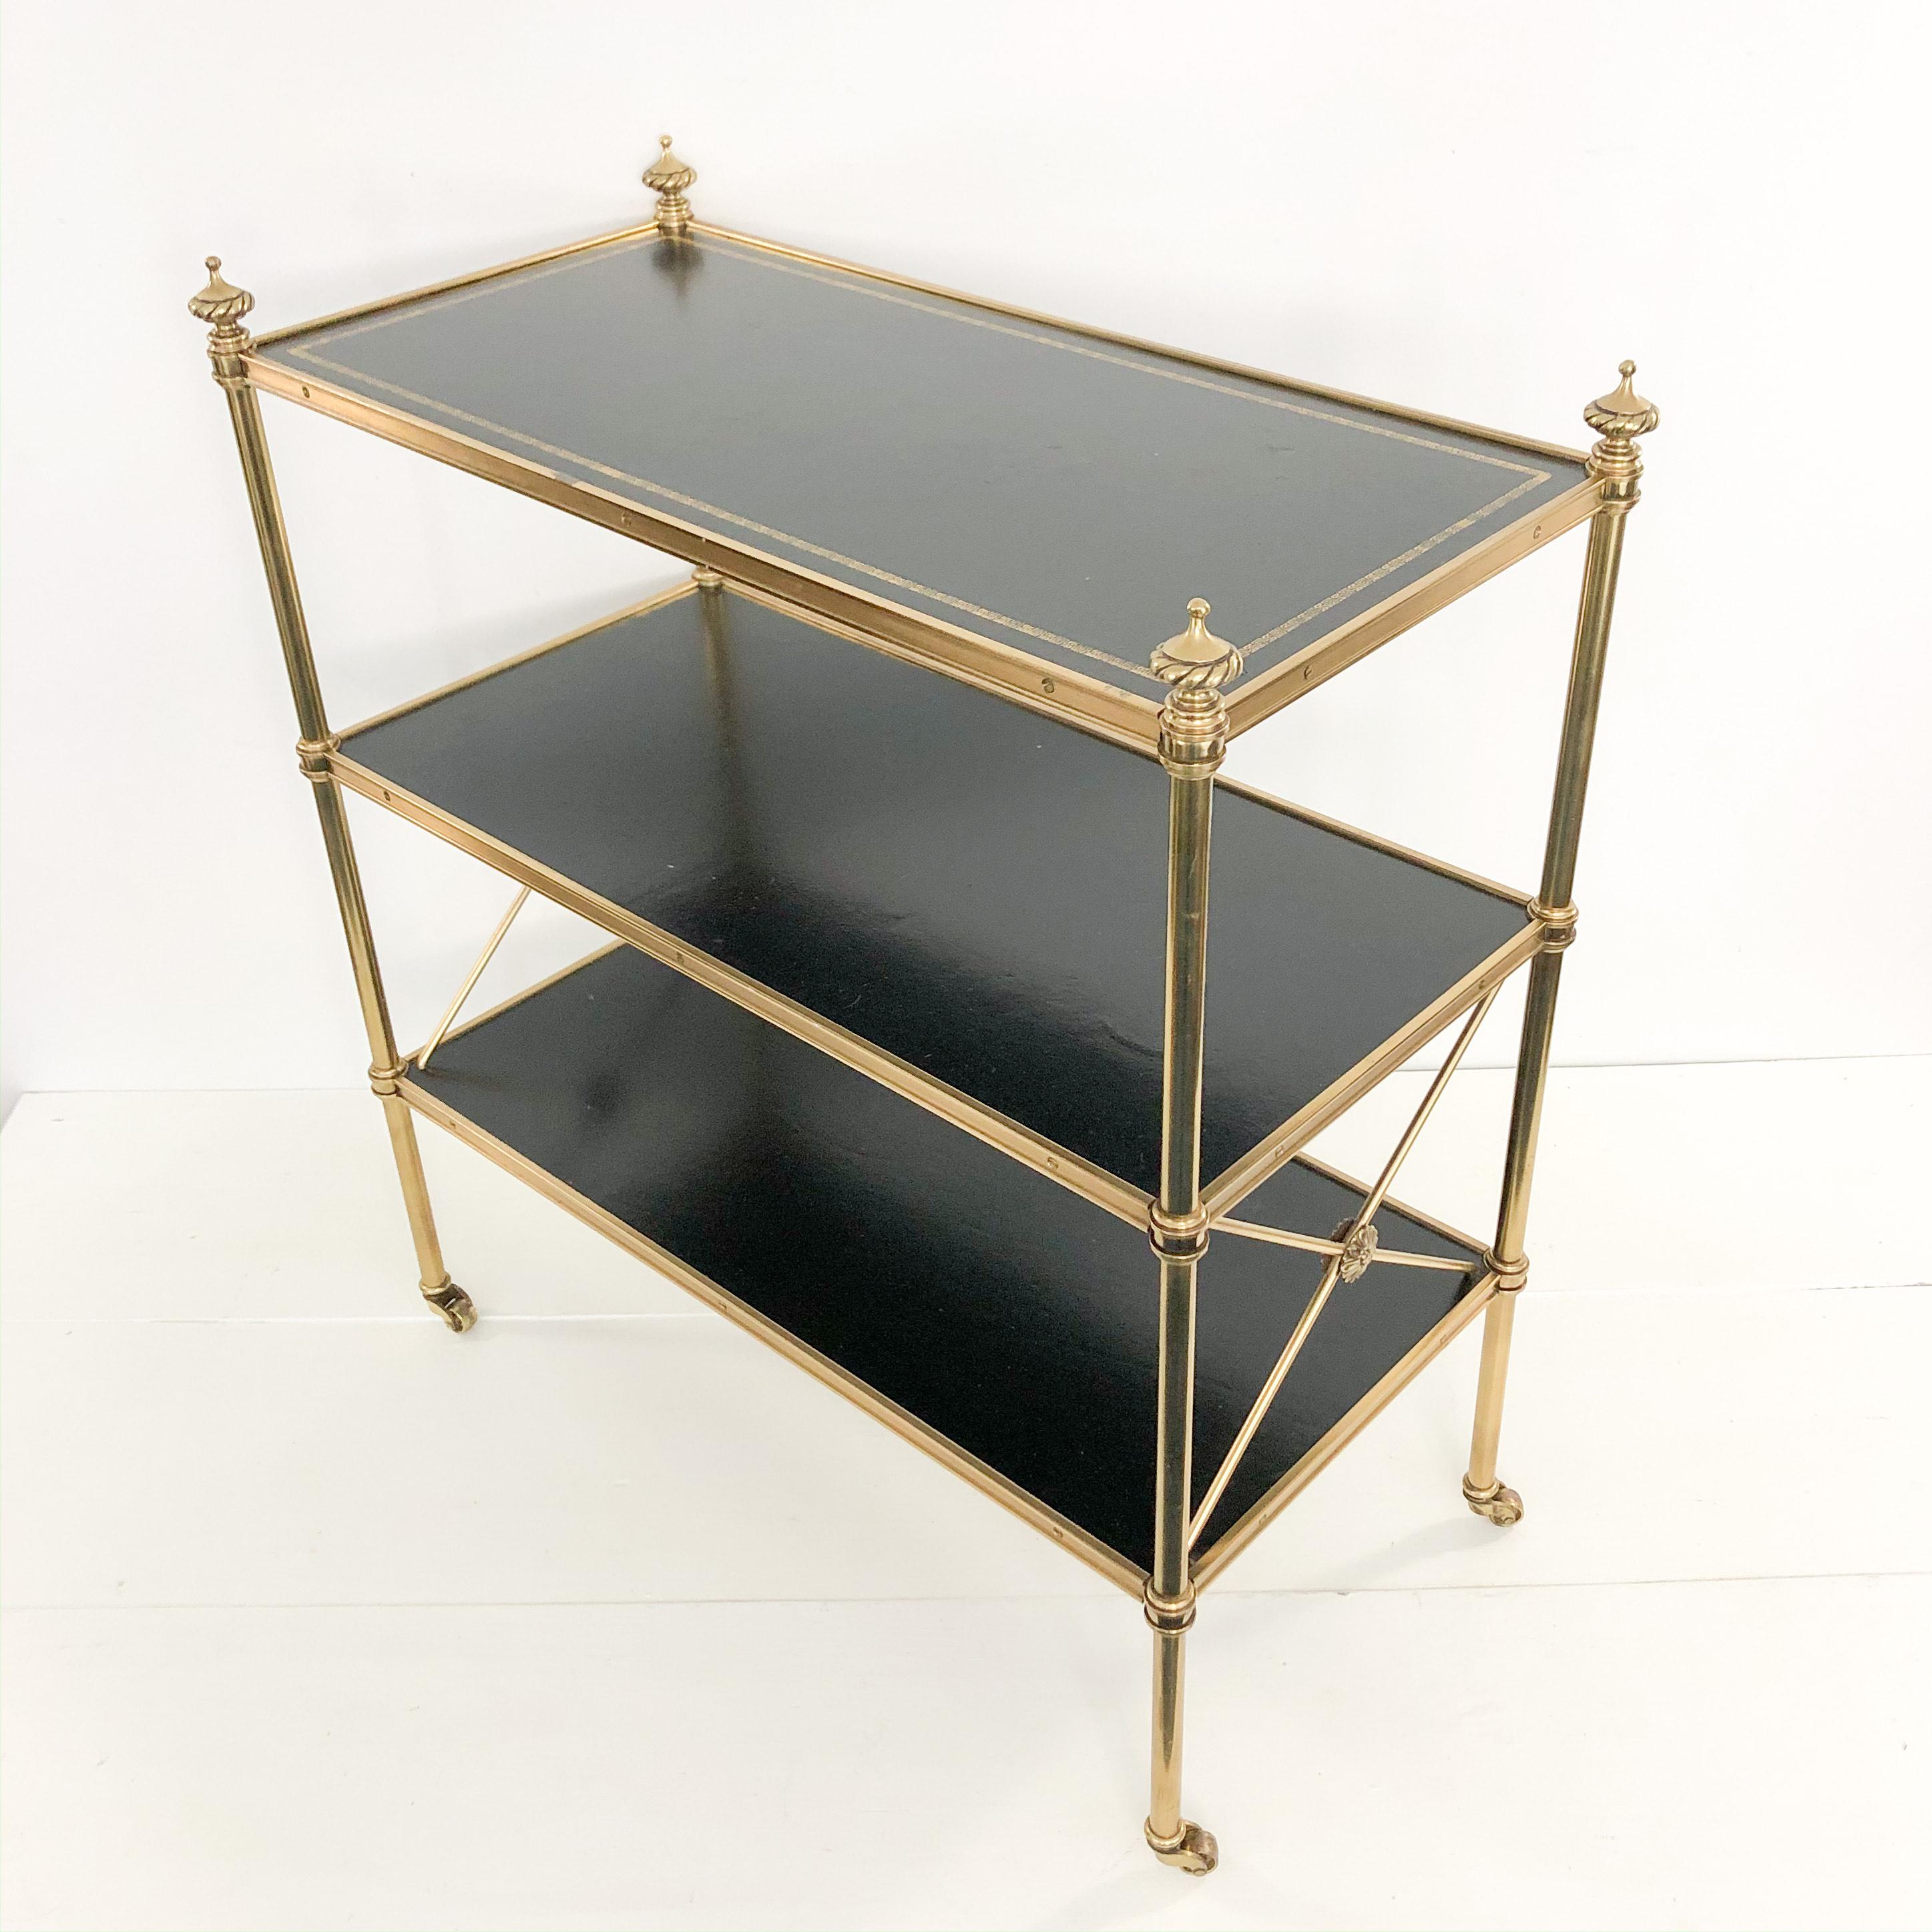 A Baker Directoire style solid brass three-tier rolling cart / shelving / bookcase / étagère with gilt embossed leather-topped shelf from the 1950s-1960s. It has the metal Baker Furniture Company metal label from that era on the underside of the